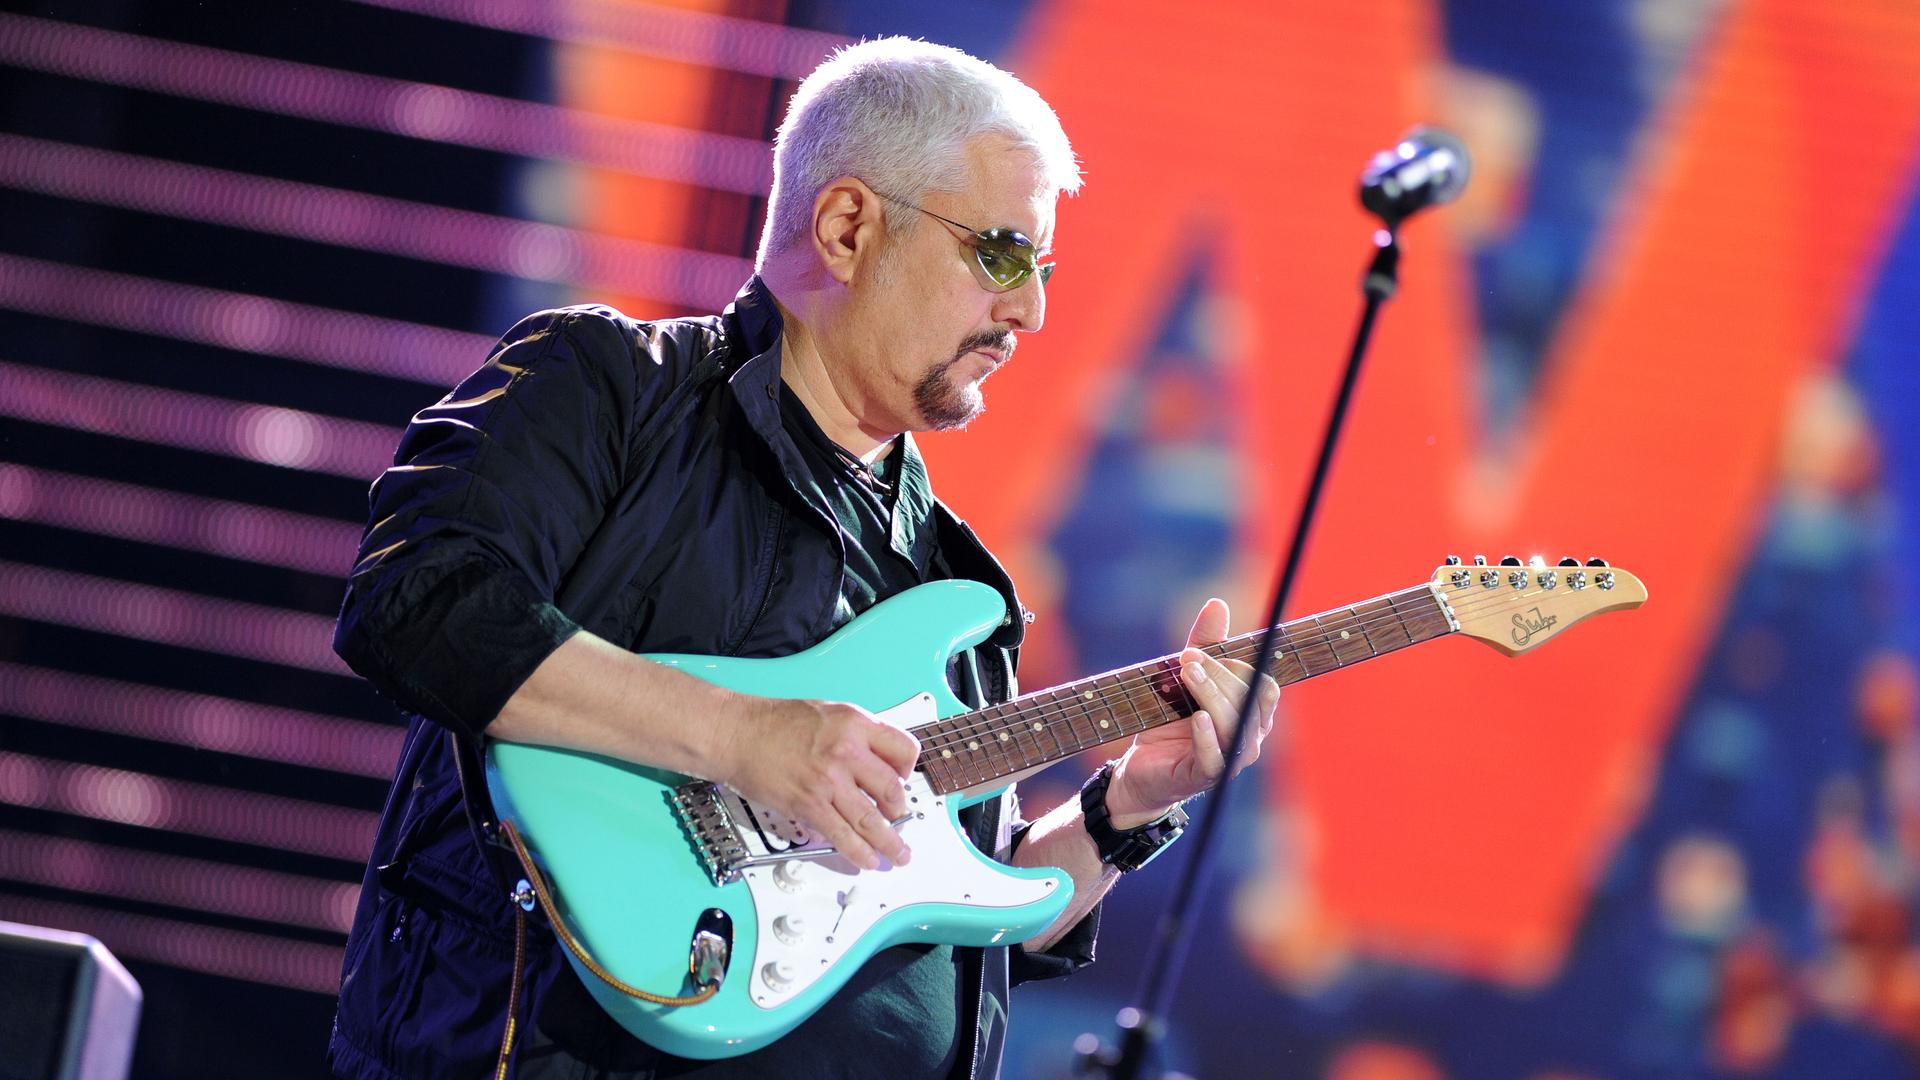 Pino Daniele attends the Wind Music Awards Show at the Arena of Verona on May 28, 2010 in Verona, Italy. 